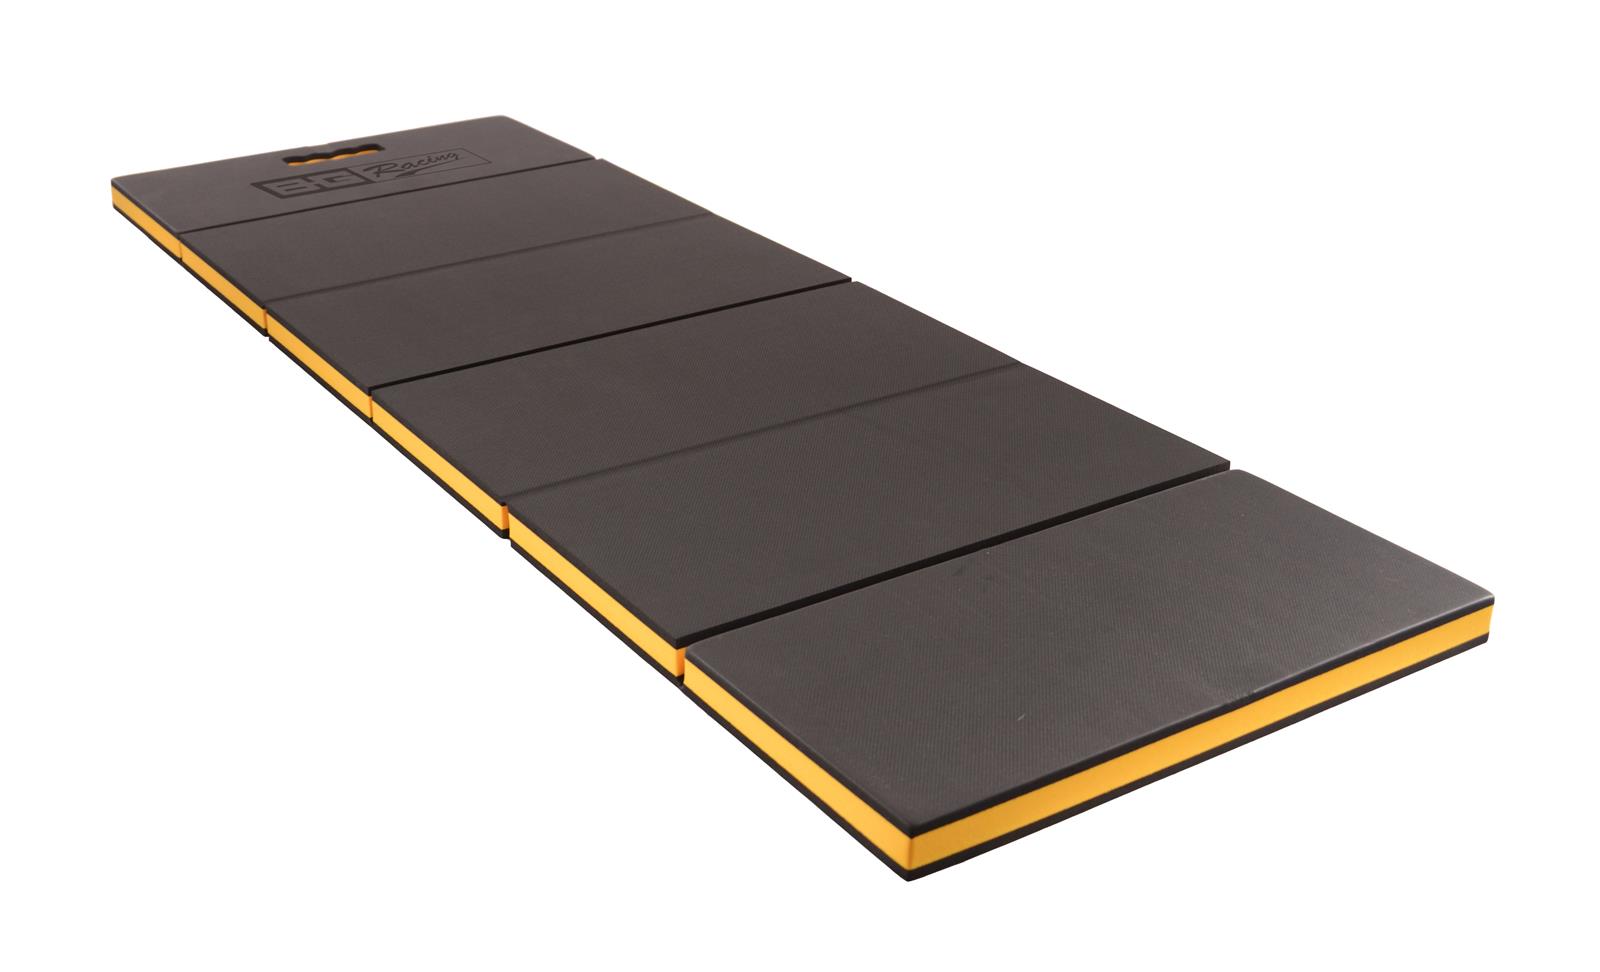 Folding Automotive Rolling Mat Zero Ground Auto Mechanics Repair Mat Rolling Pad for Cars Working and Household